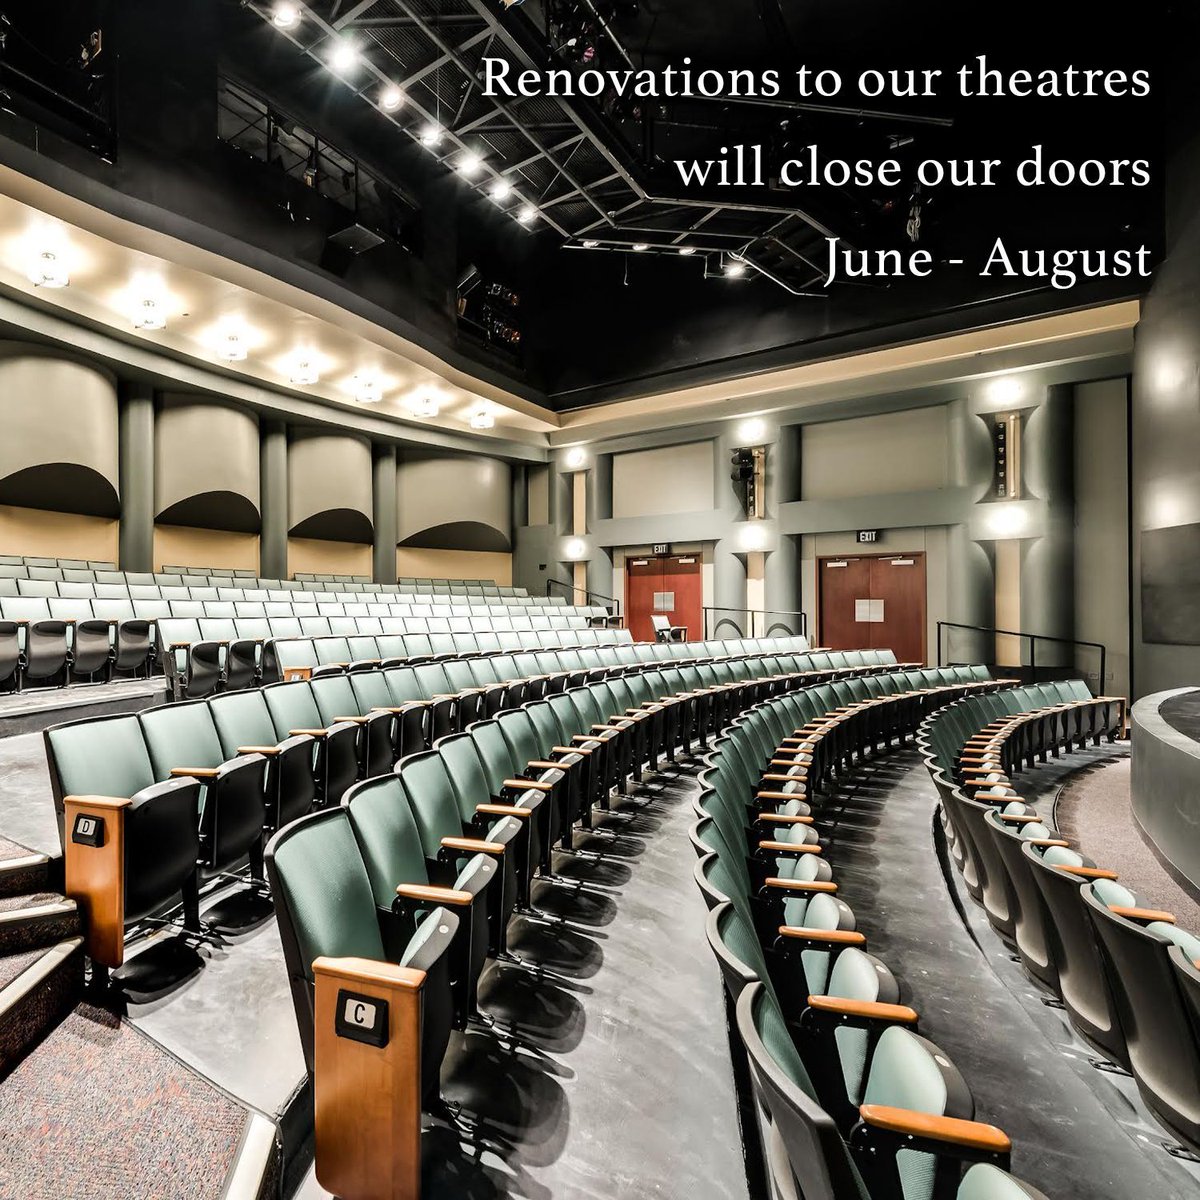 While closing our doors is sad, we are so excited for the upgrades to our building! So keep up with us as we update you on the renovations across socials! And don't forget, we still have events all through May! #renovations #closures #upgrades #irvingtx #irvingarts